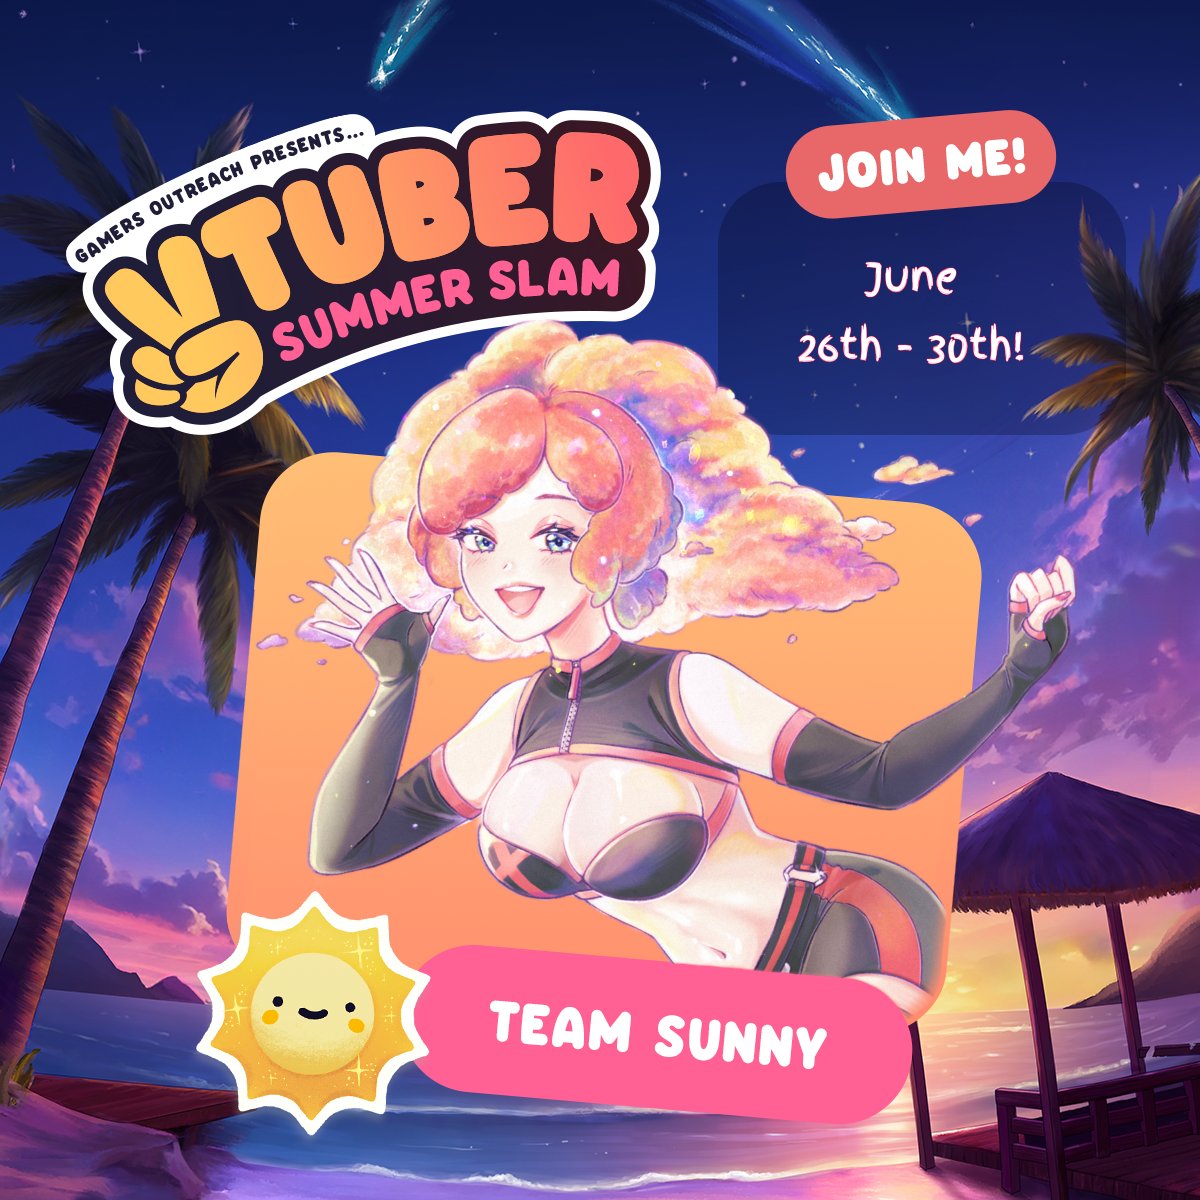 Im going to be participating in the #VtuberSS2024 with @GamersOutreach ! Im on team Sunny bc the sun is just too cute! 🌞 Also gotta support my sky bros😎☁️

If any mutuals are partaking and wanting to collab let me know! 😁